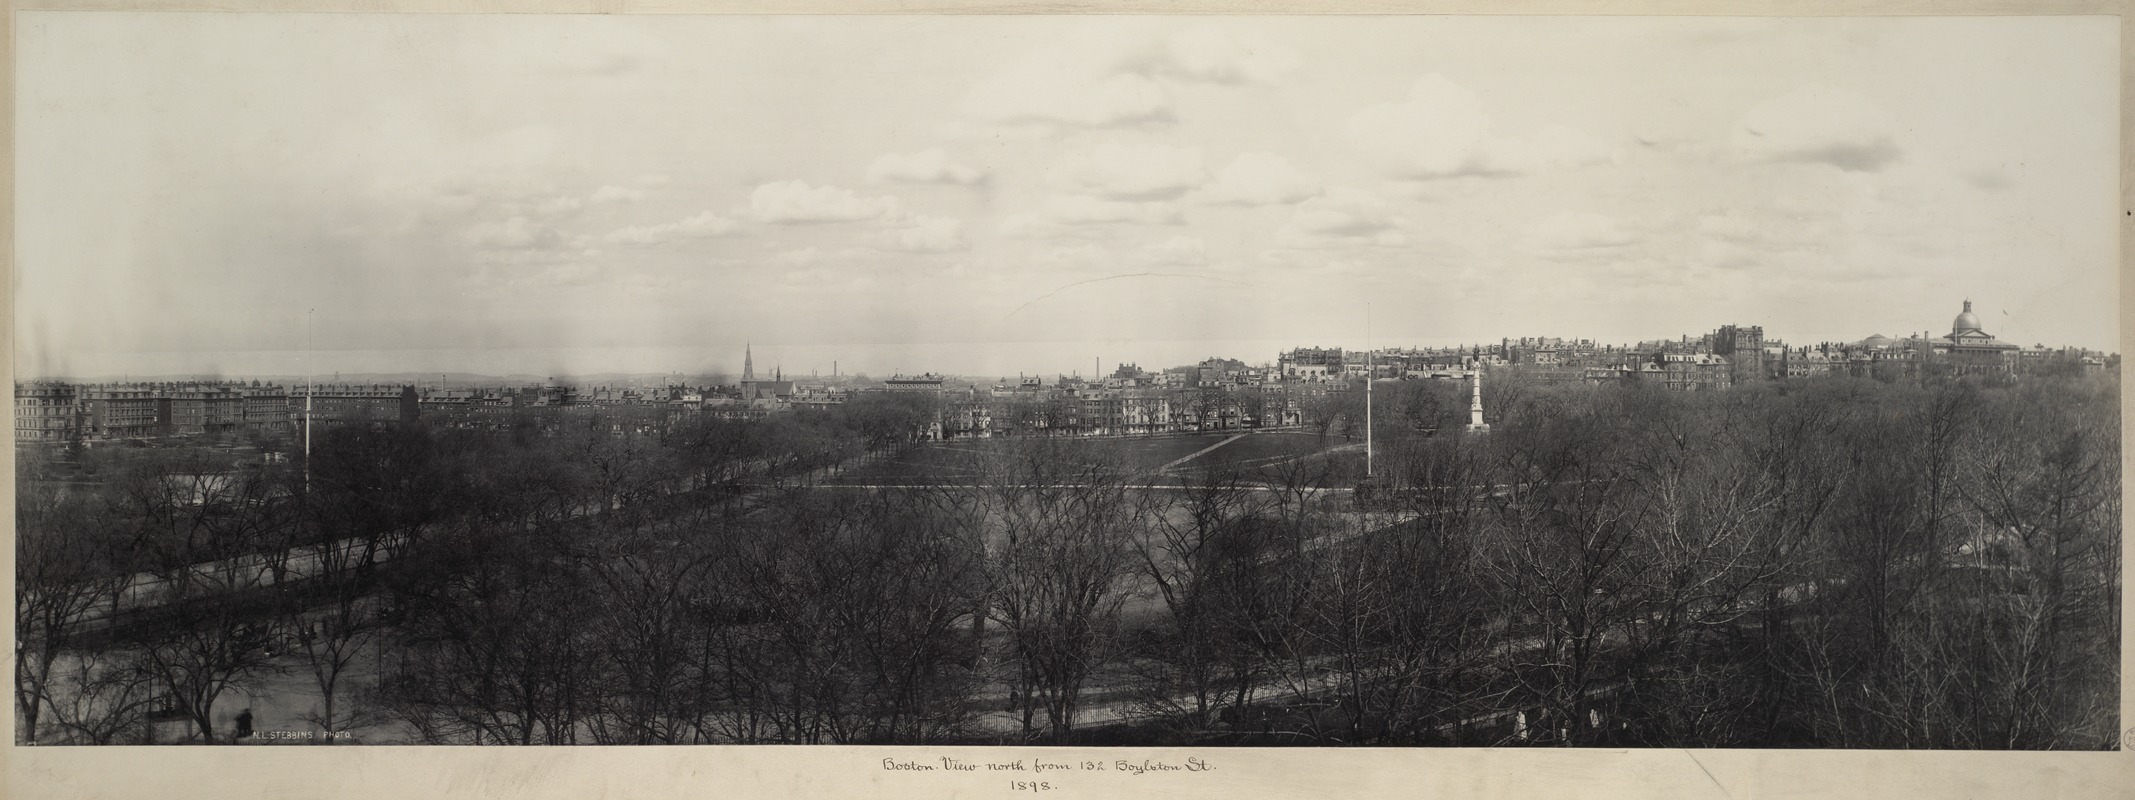 Boston. View north from 132 Boylston St. 1898